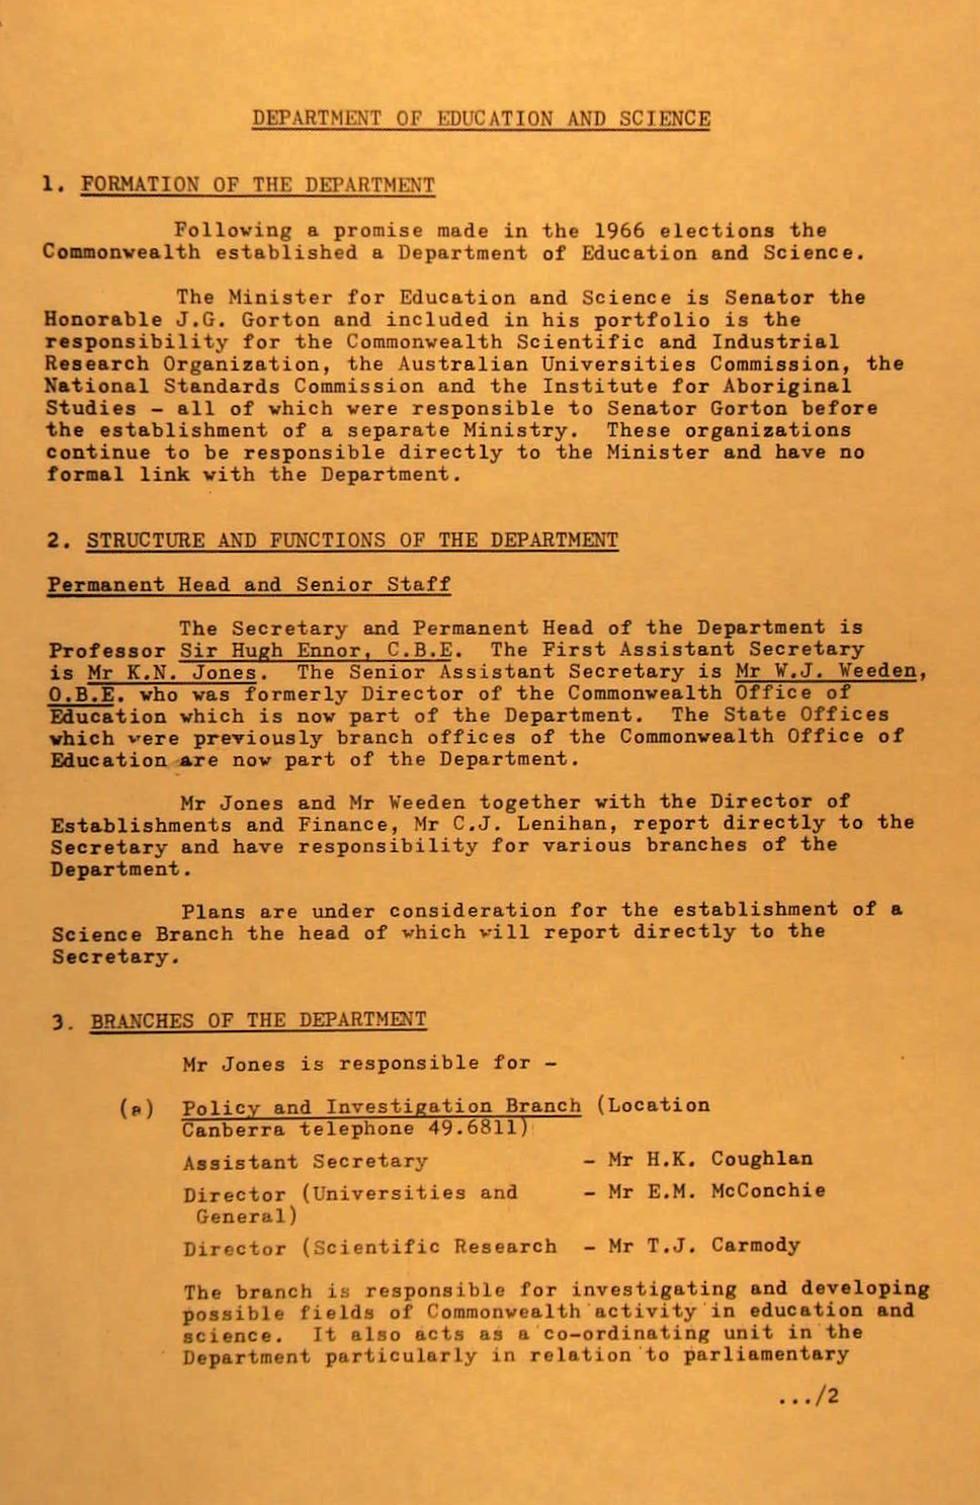 Document outlining new Department of Education and Science, with the announcement of John Gorton as the first minister.